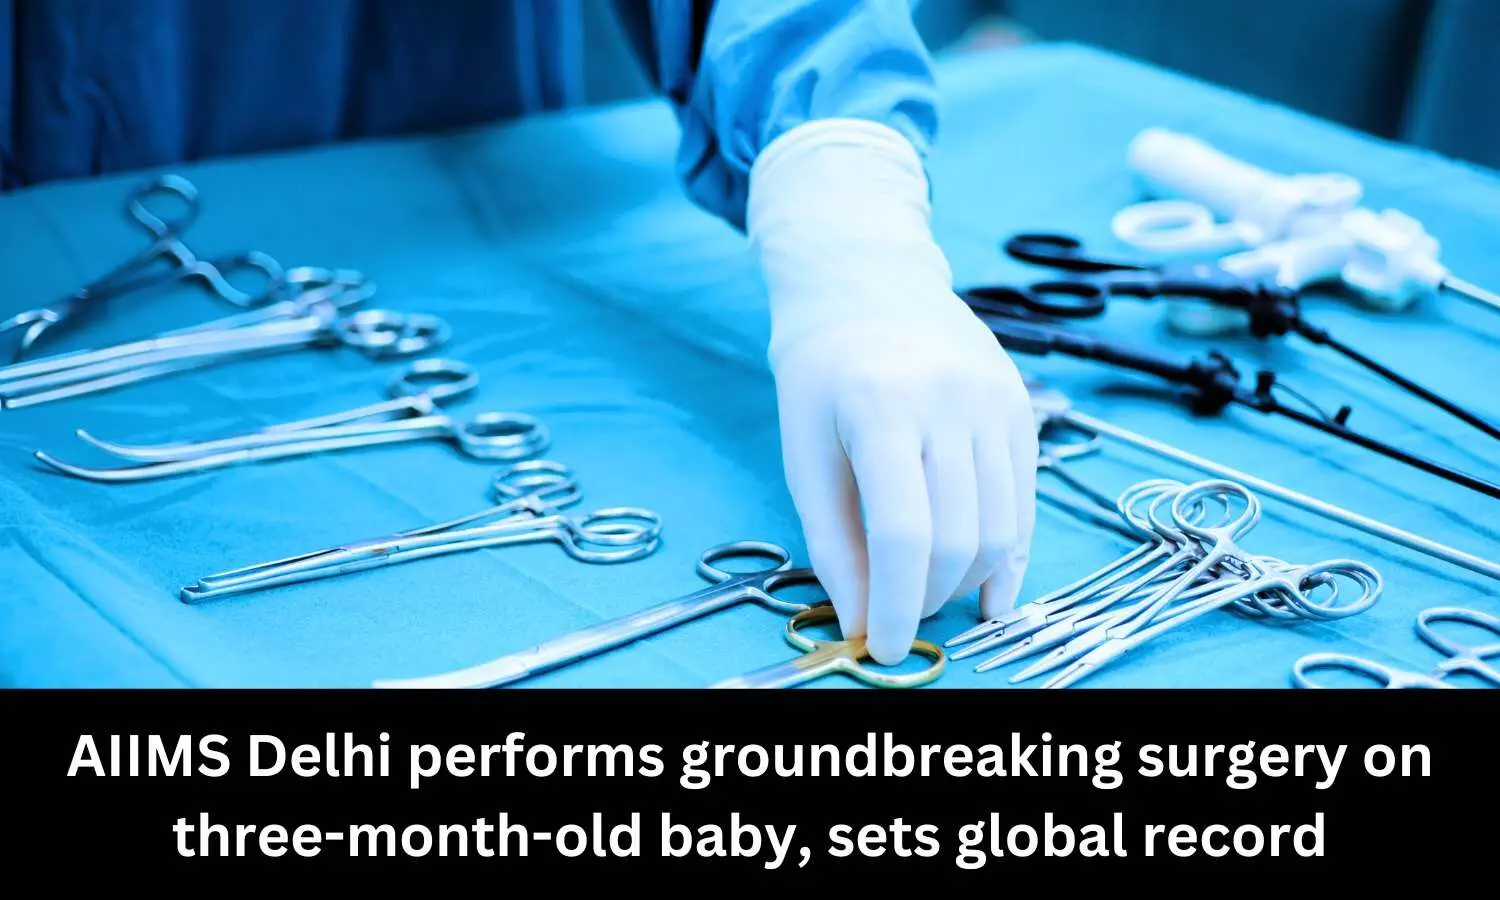 AIIMS Delhi performs groundbreaking surgery on three-month-old baby, sets global record